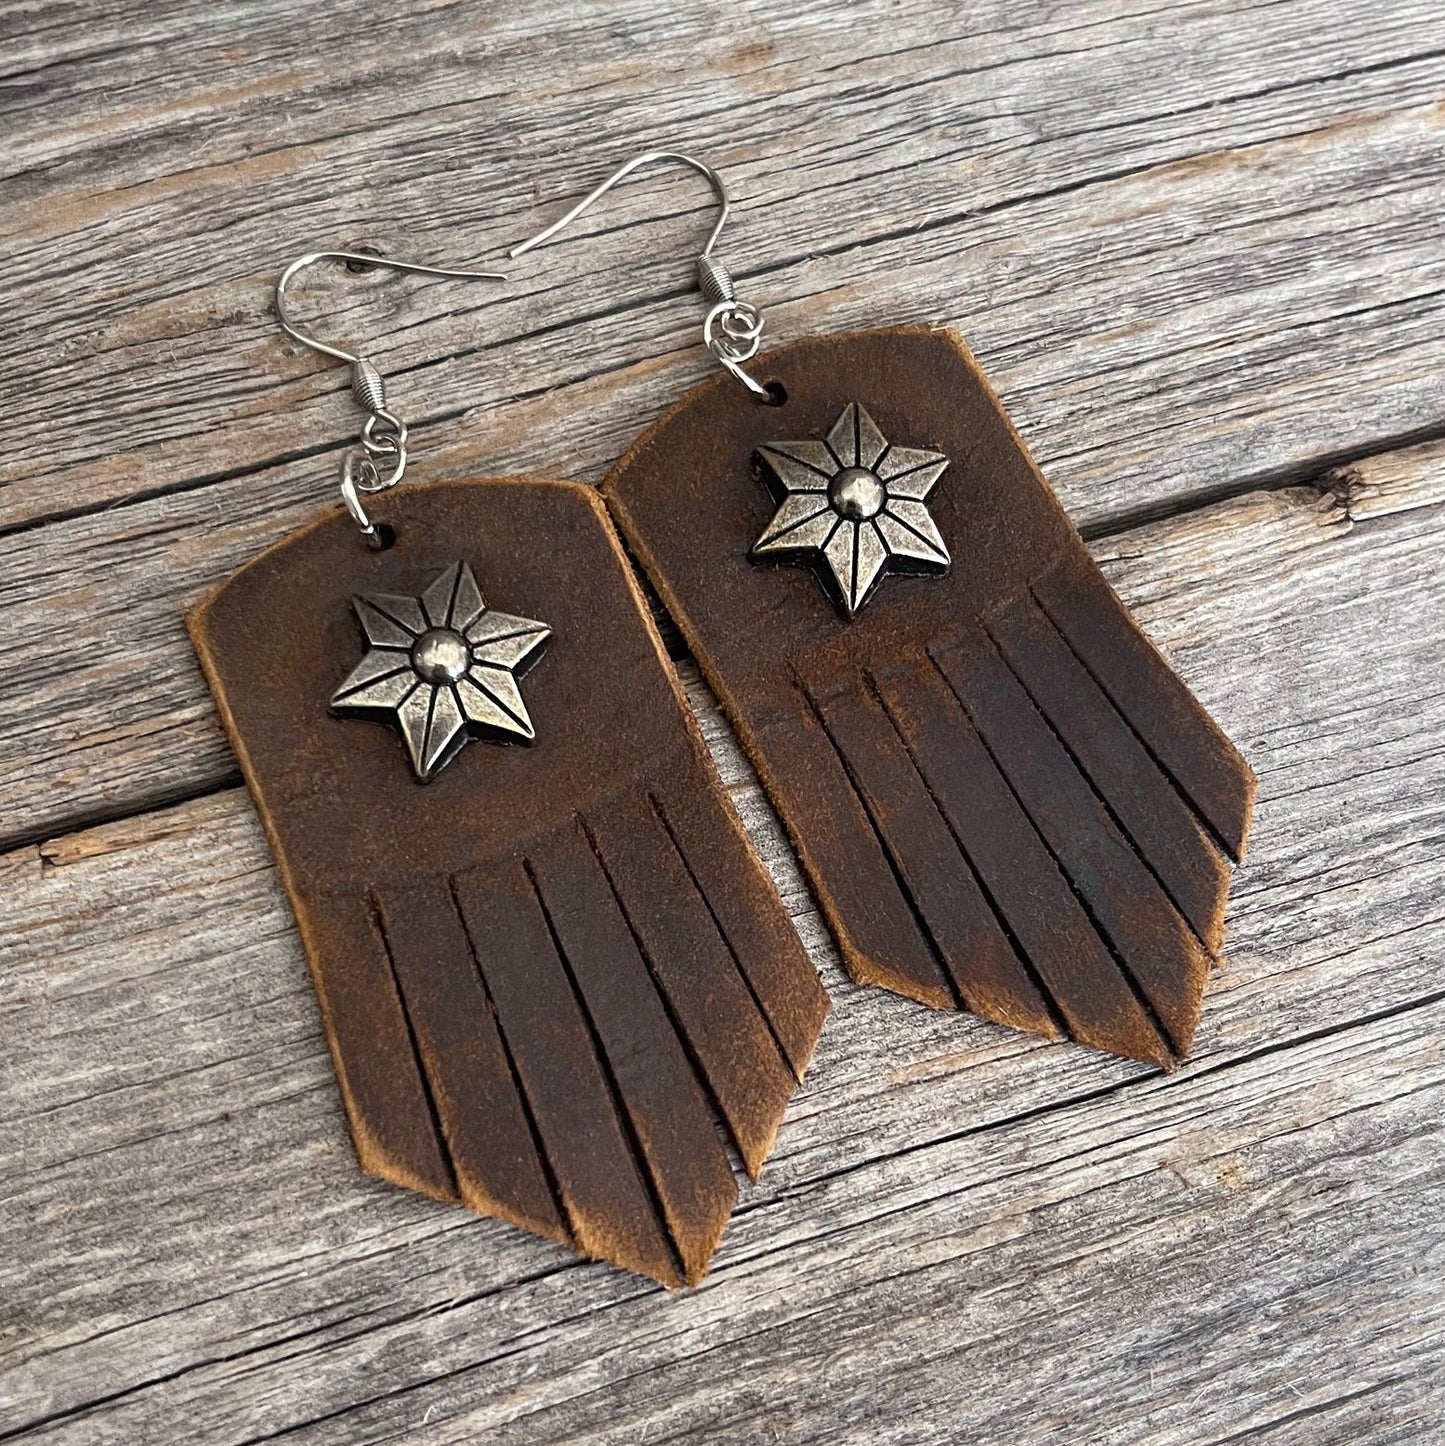 MADE TO ORDER - Leather Fringe Earrings with Star Rivets